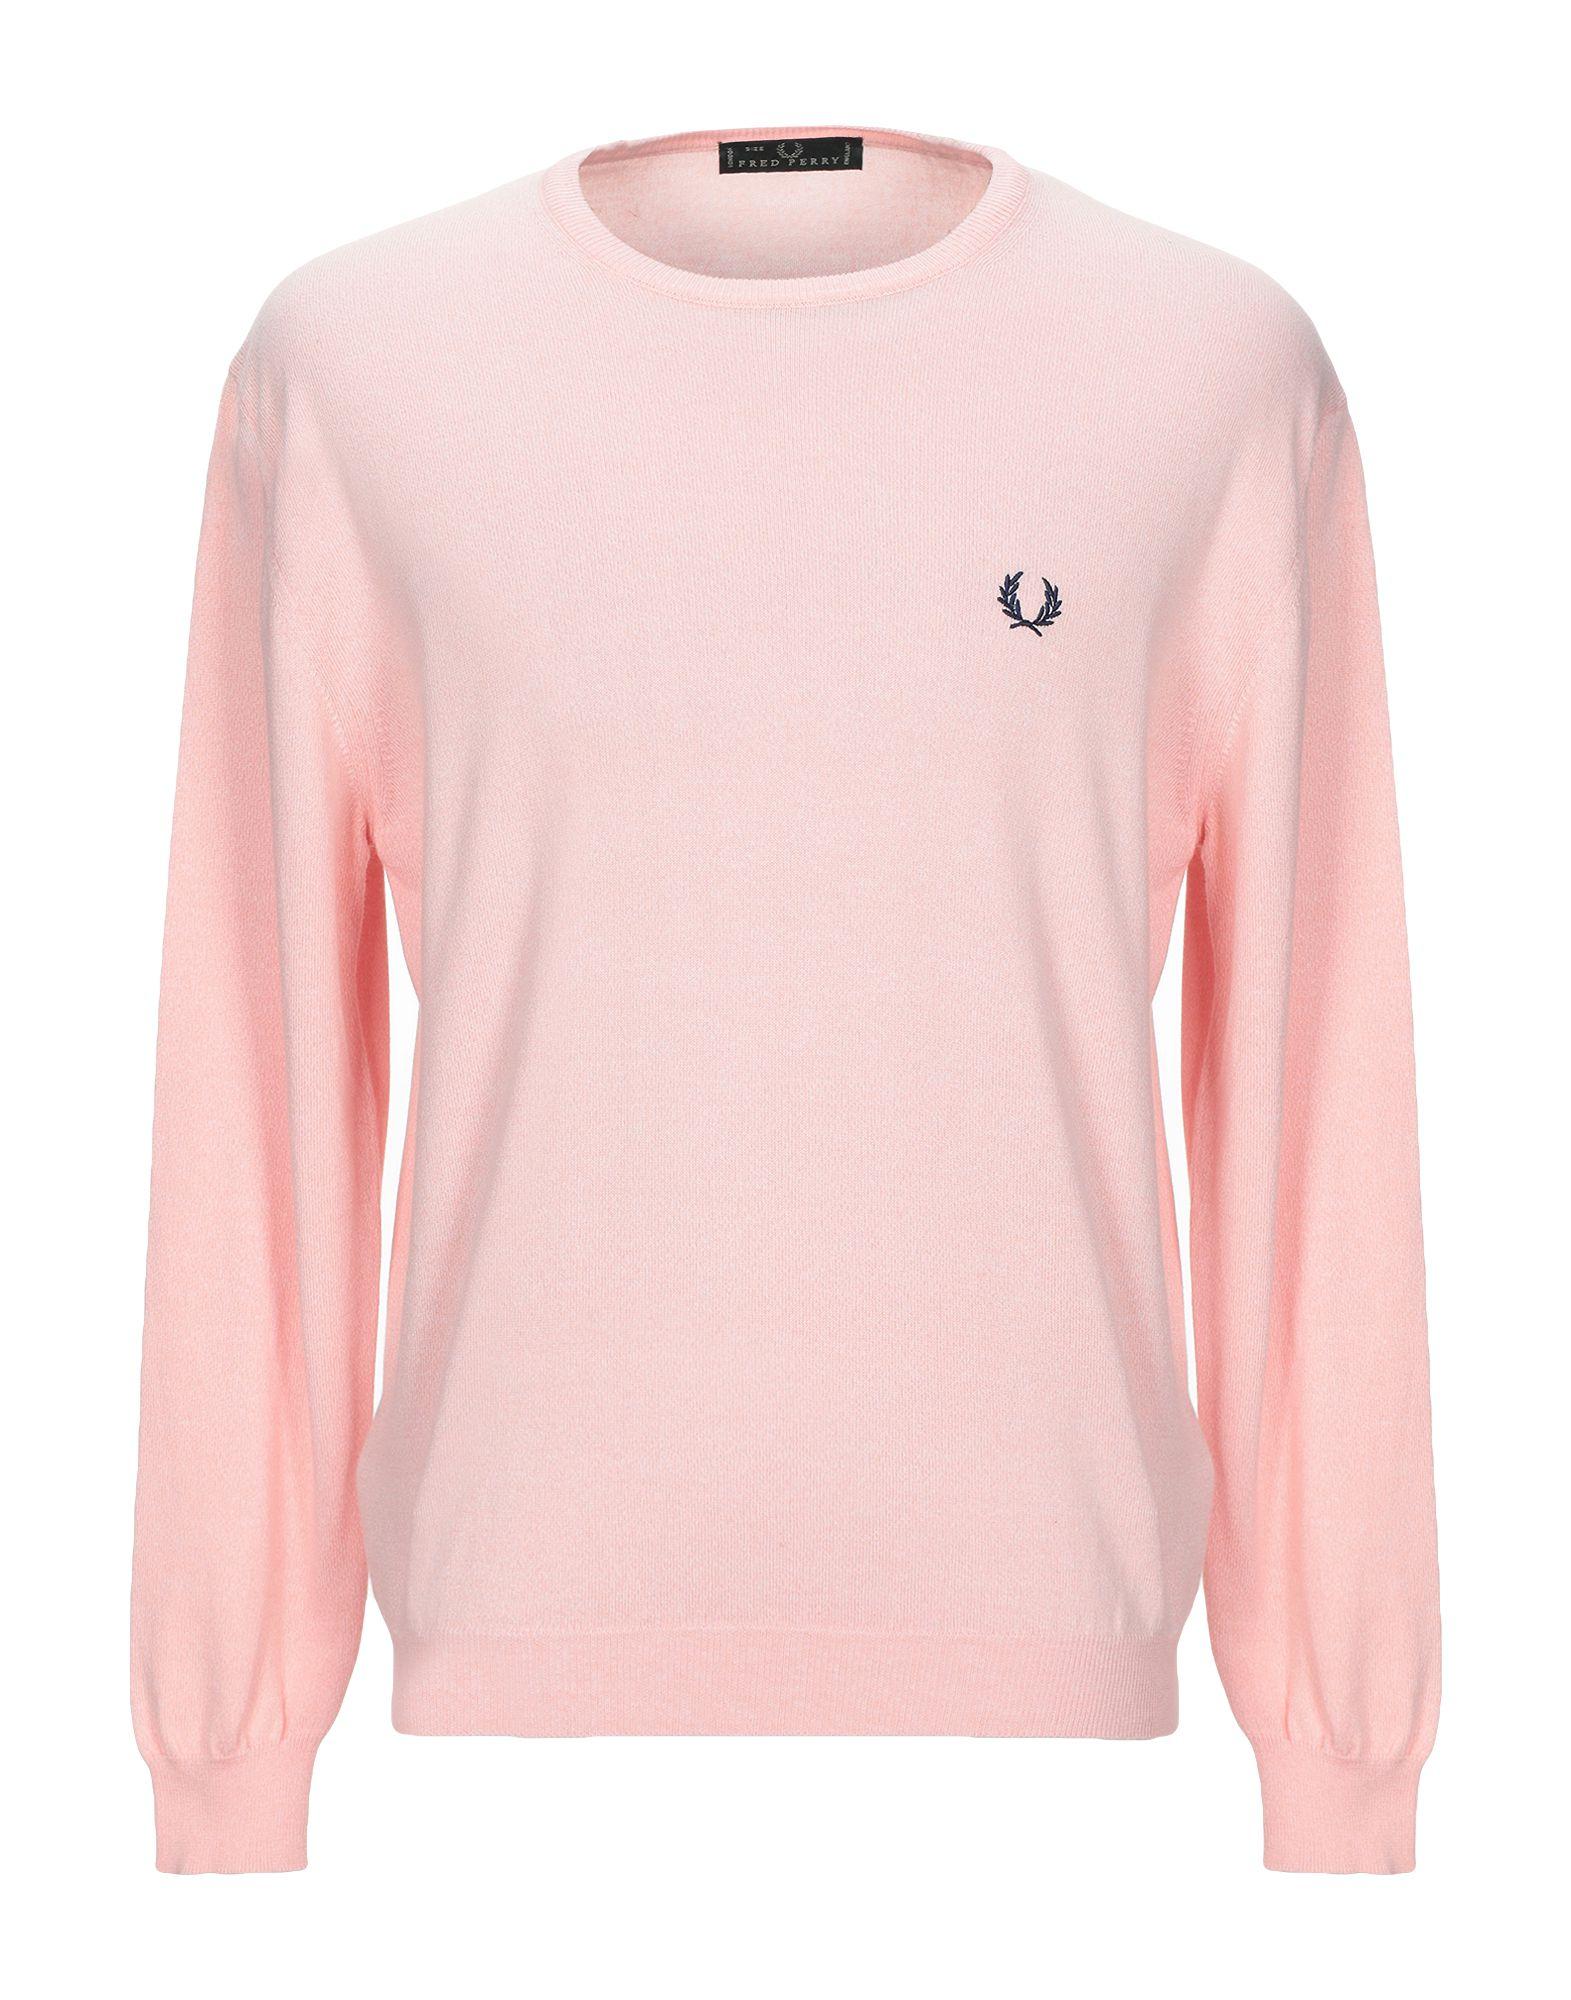 Fred Perry Cotton Jumper in Light Pink (Pink) for Men - Lyst